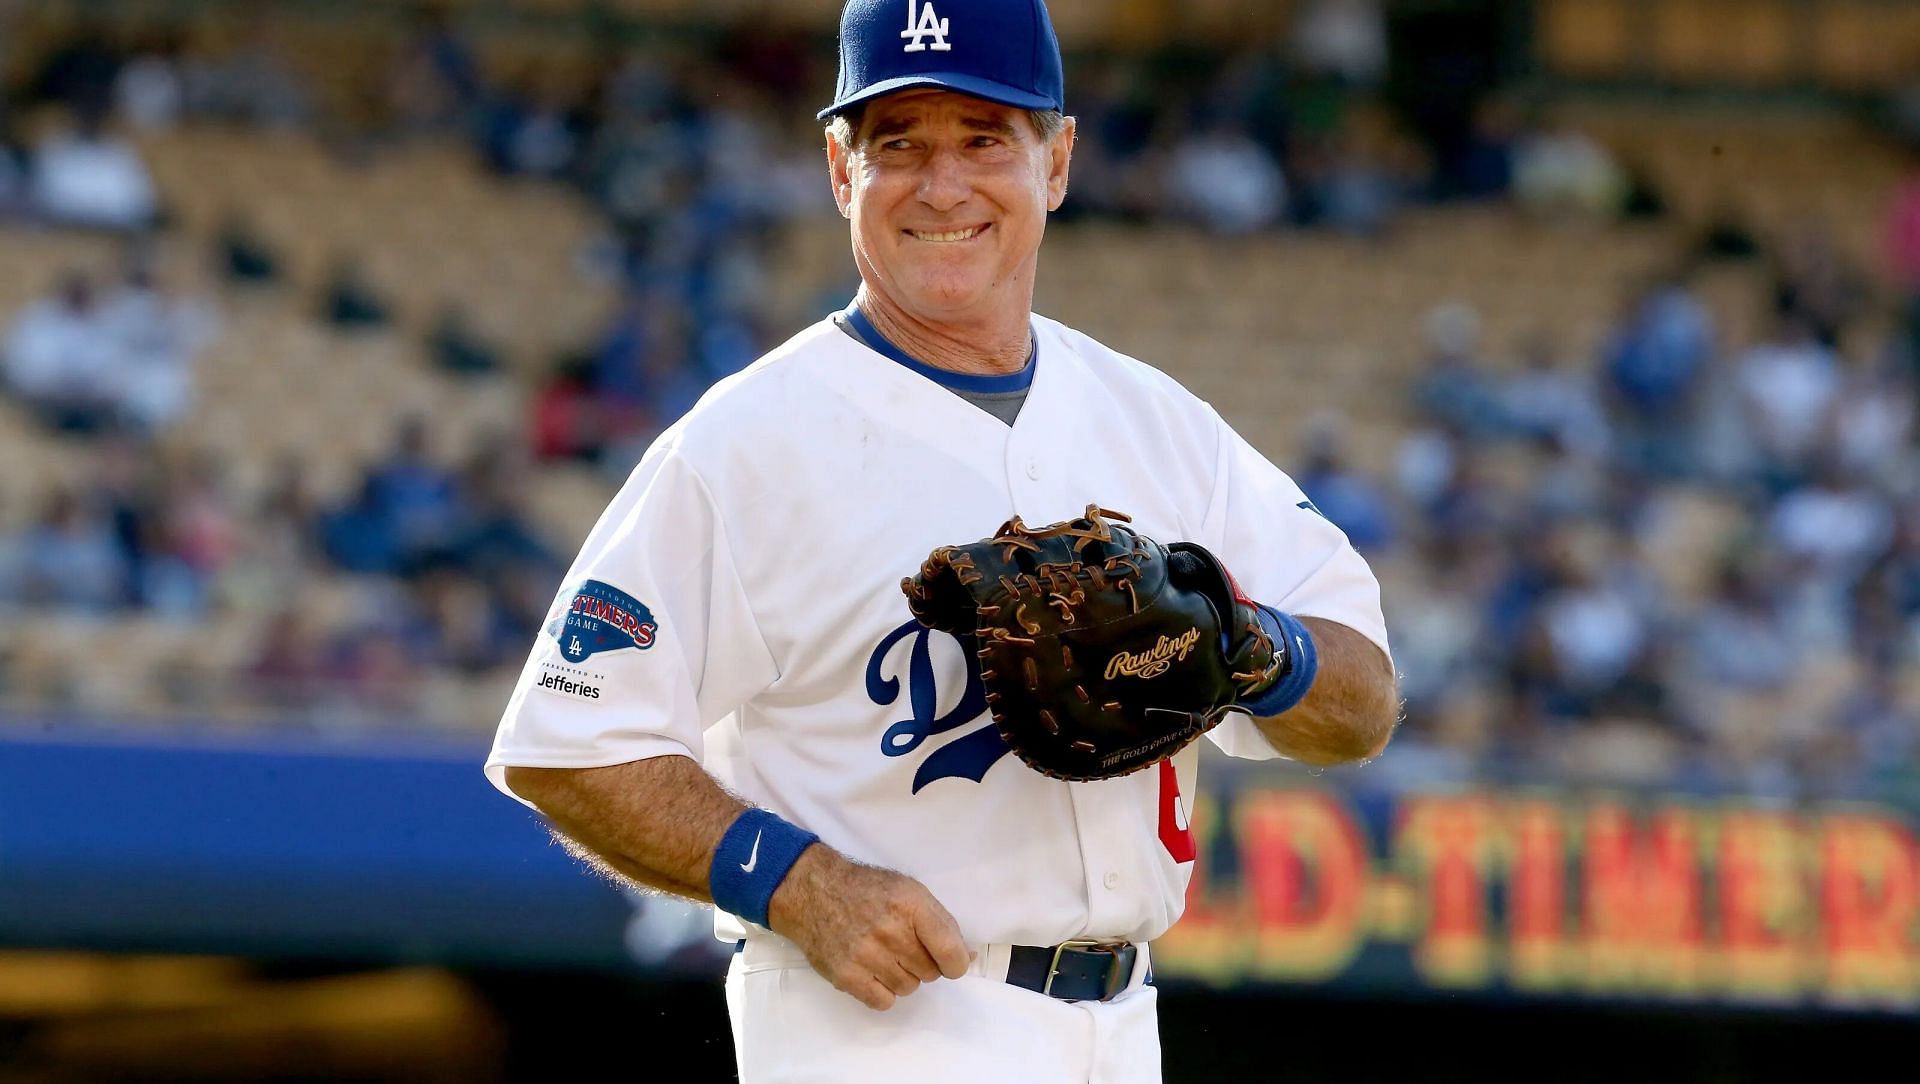 Steve Garvey announced a campaign for Senate with his wife behind him